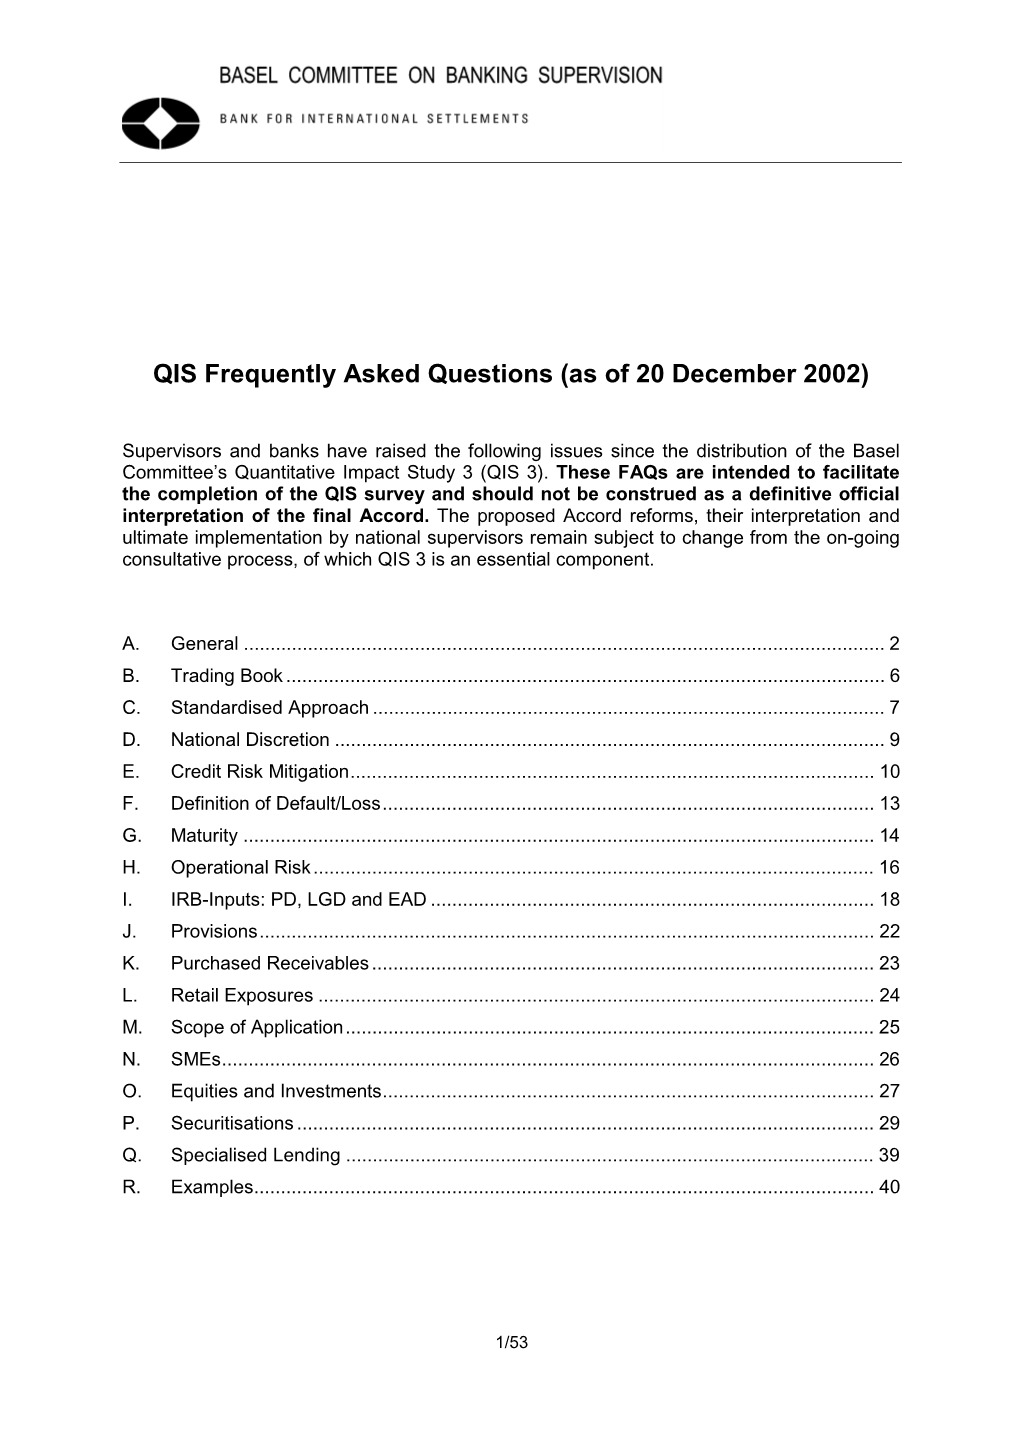 QIS Frequently Asked Questions (As of 20 December 2002)